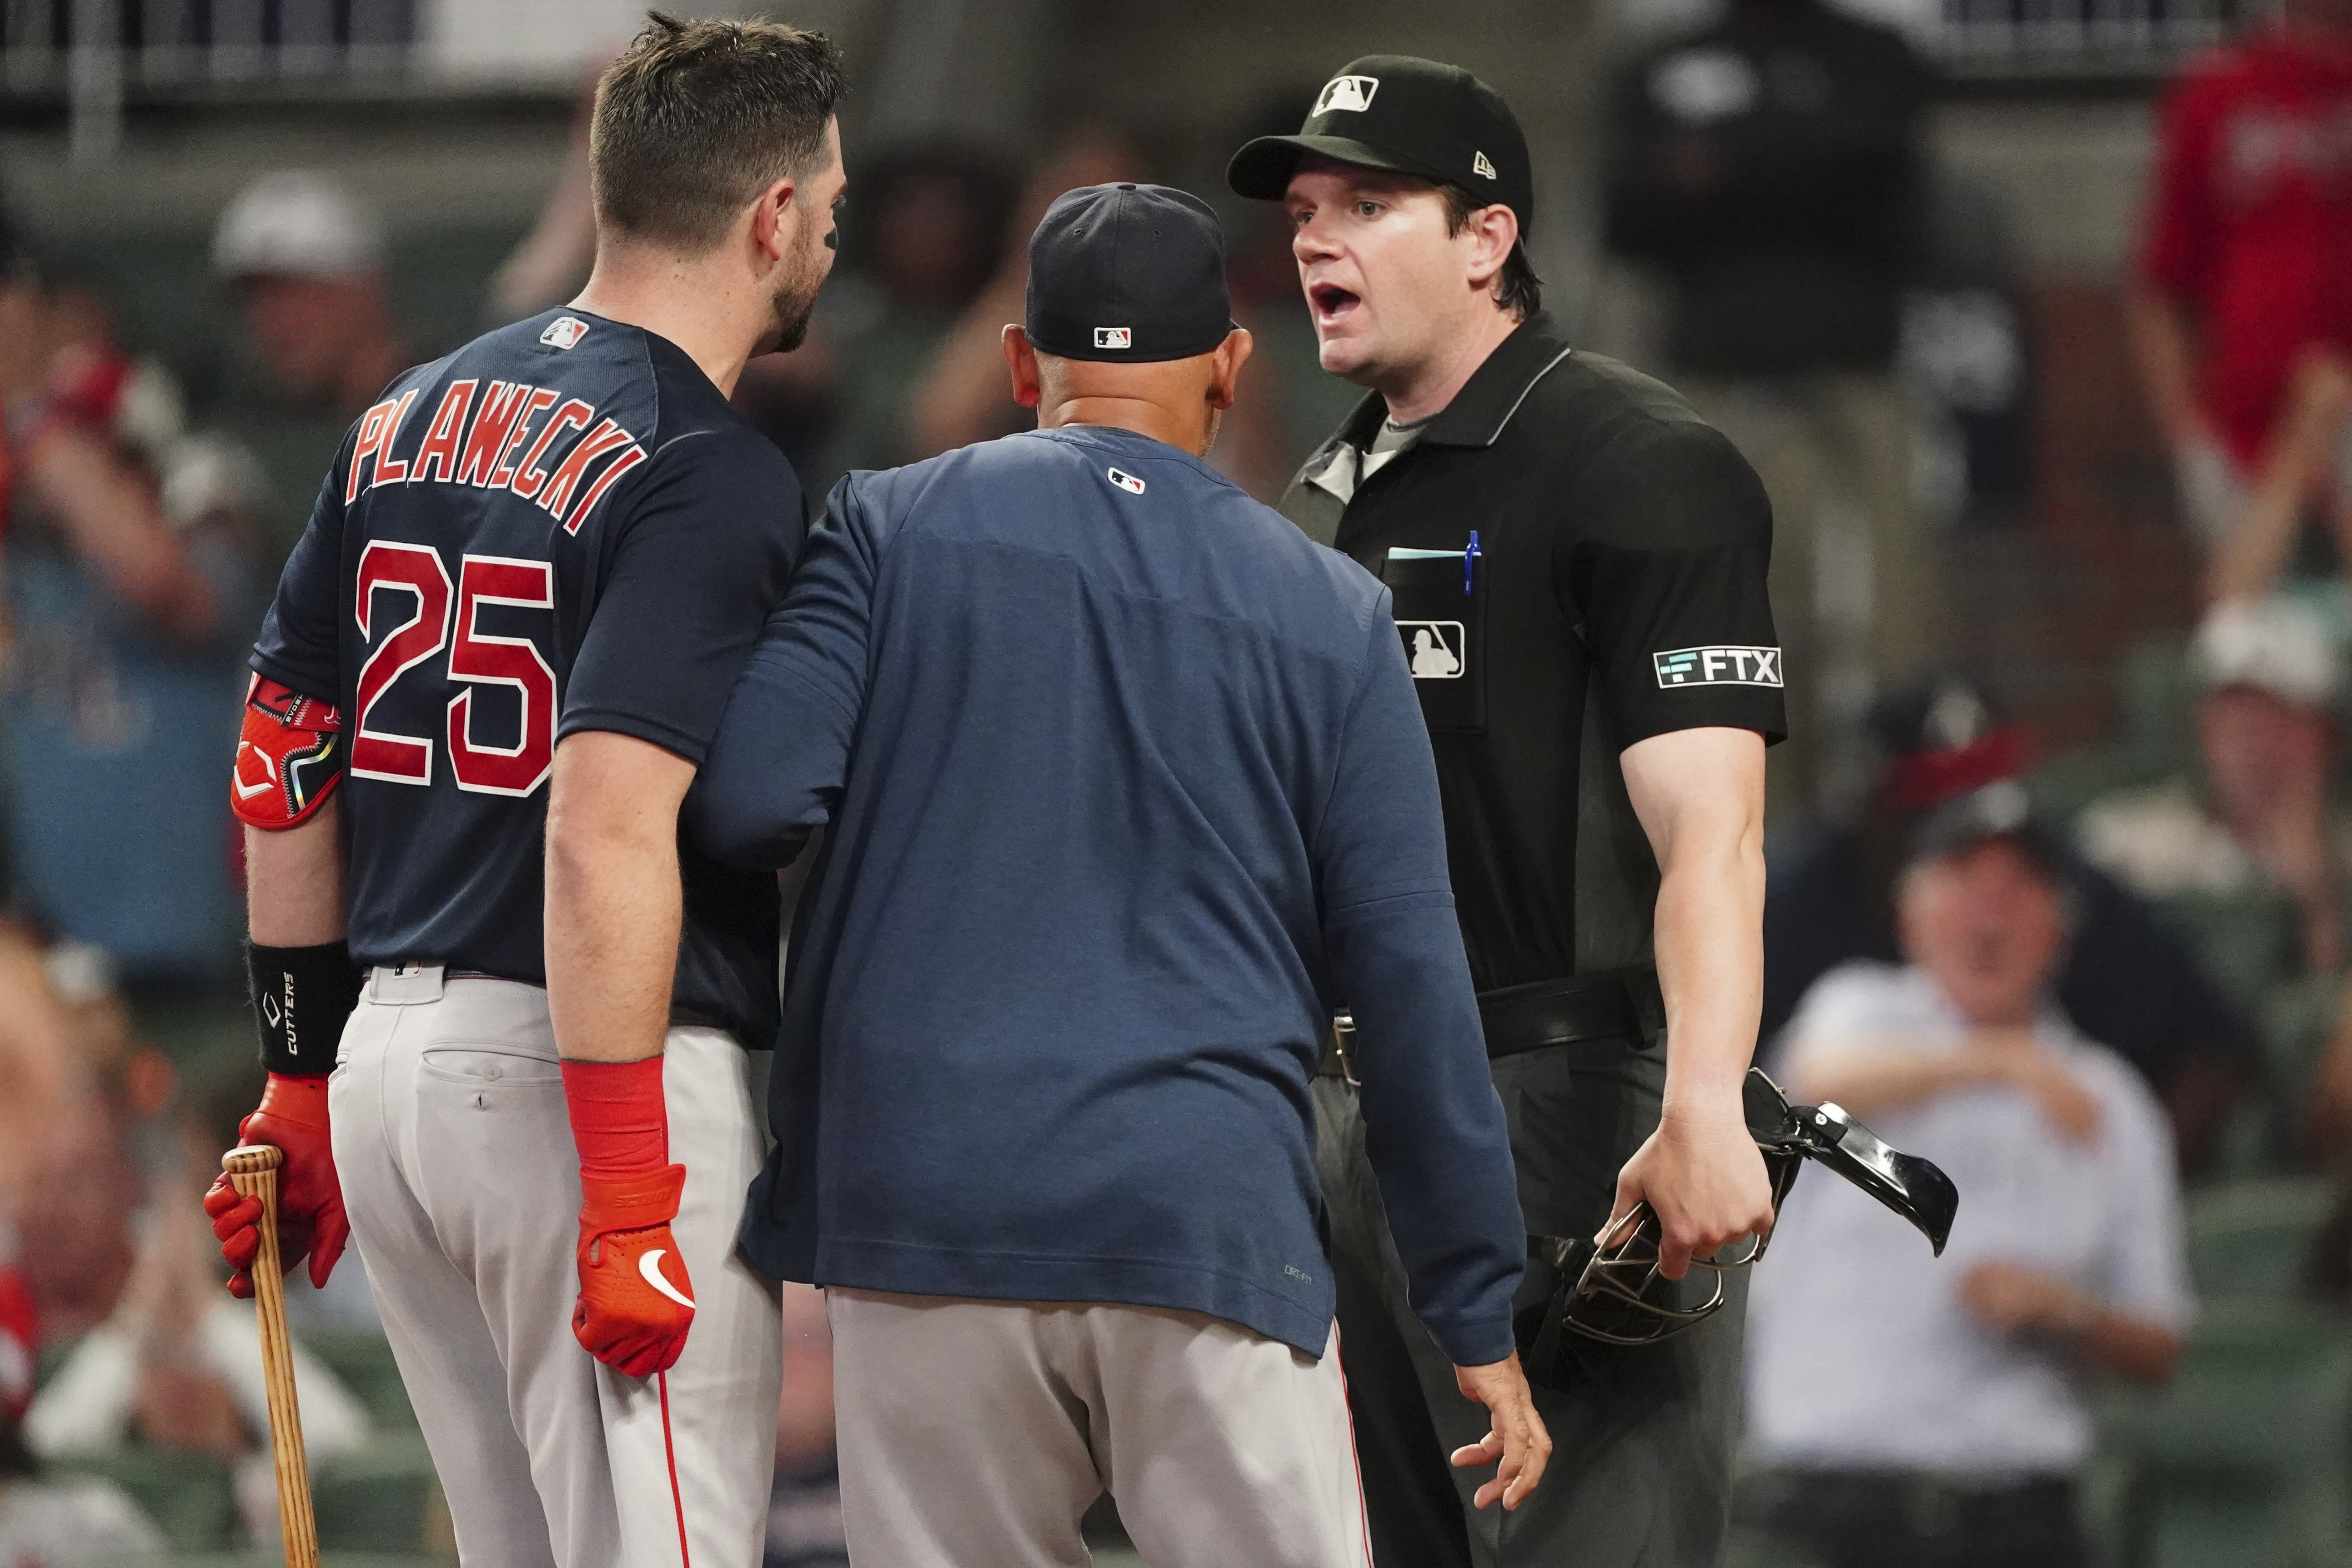 MLB's New FTX Umpire Uniform Patch Replaced Traditional Memorial